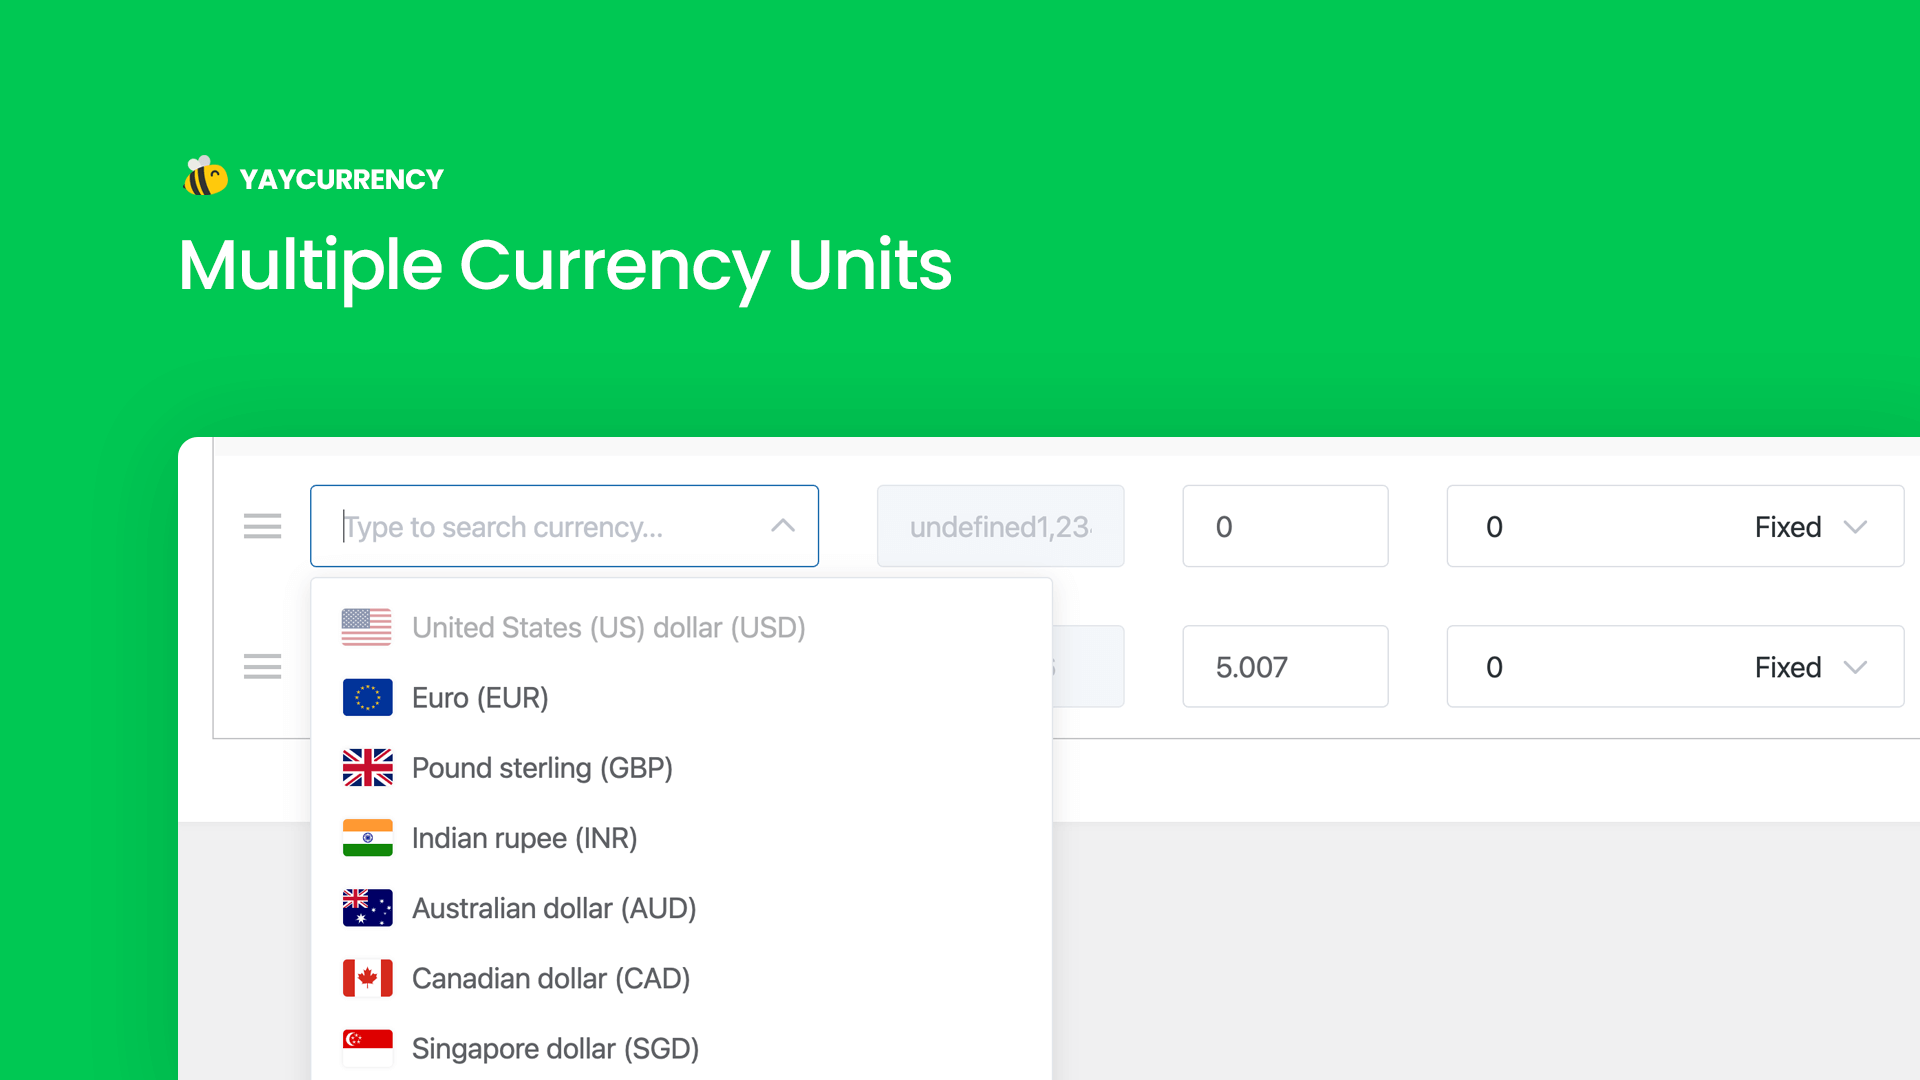 Select multiple currency units, preview, drag and drop to reorder them